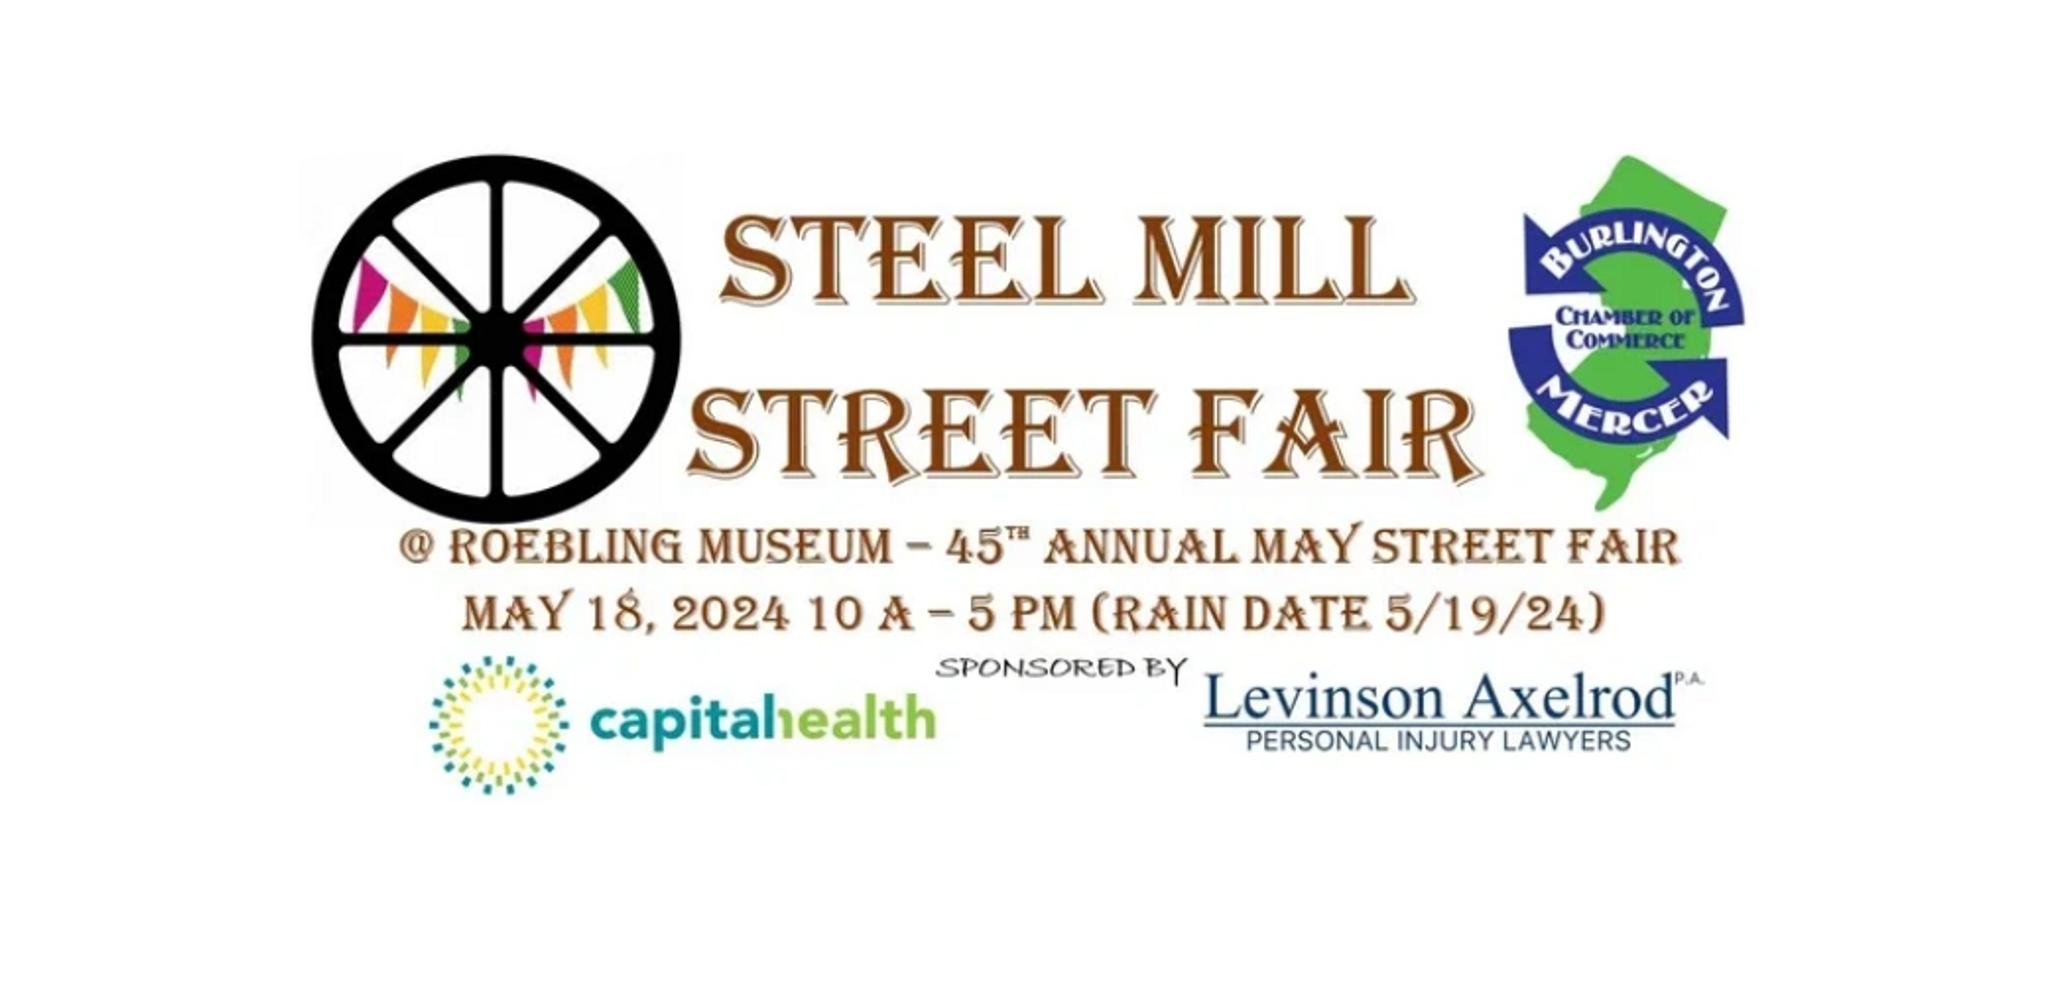 Steel Mill Street Fair @Roebling Museum on May 18, 2024 formerly the 45th Bordentown Street Fair